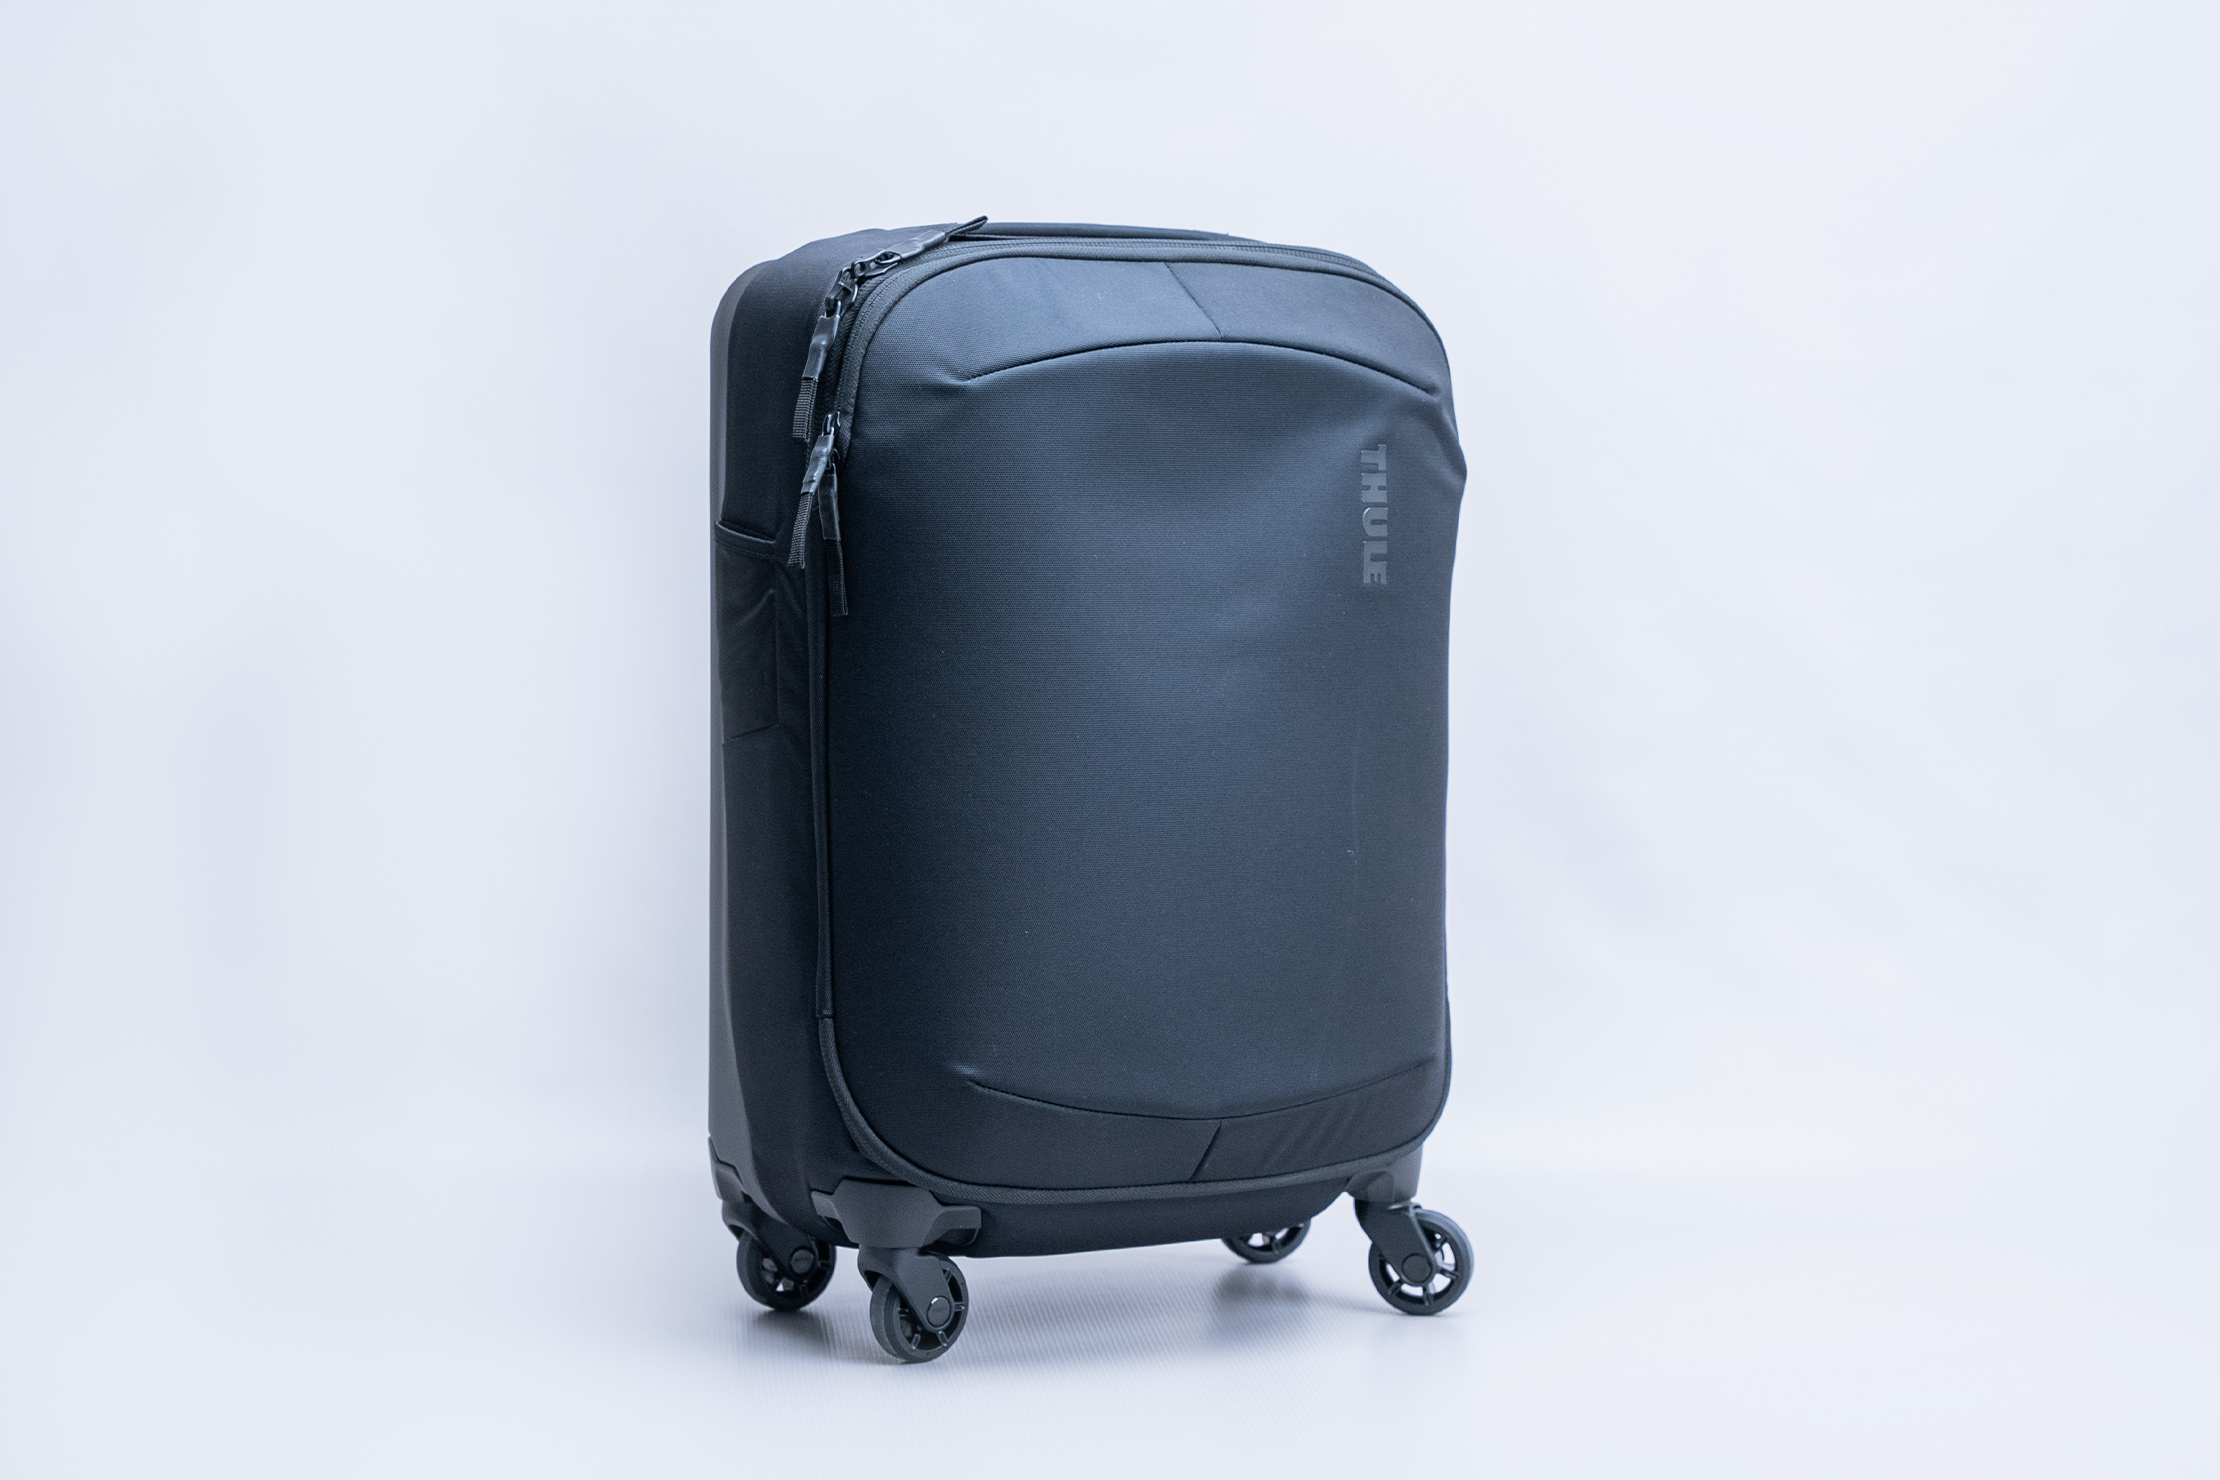 Thule Subterra 2 Carry-On Suitcase Spinner Full